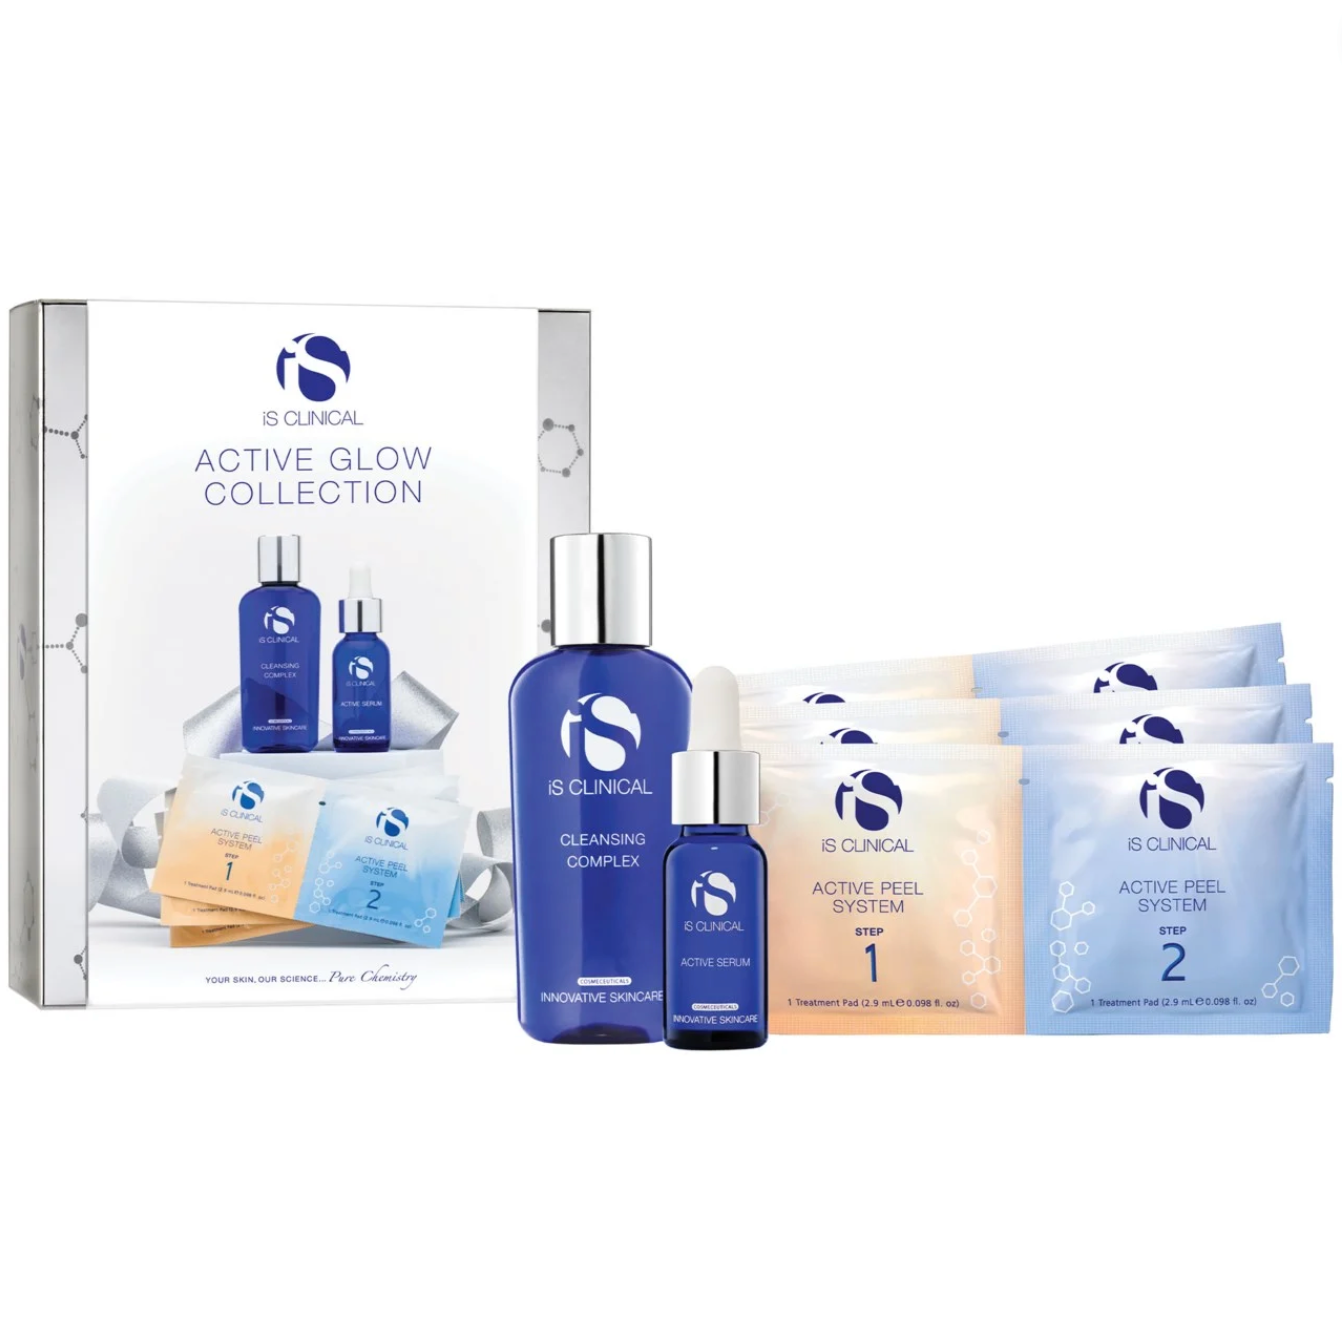 IS Clinical Active Glow Collection